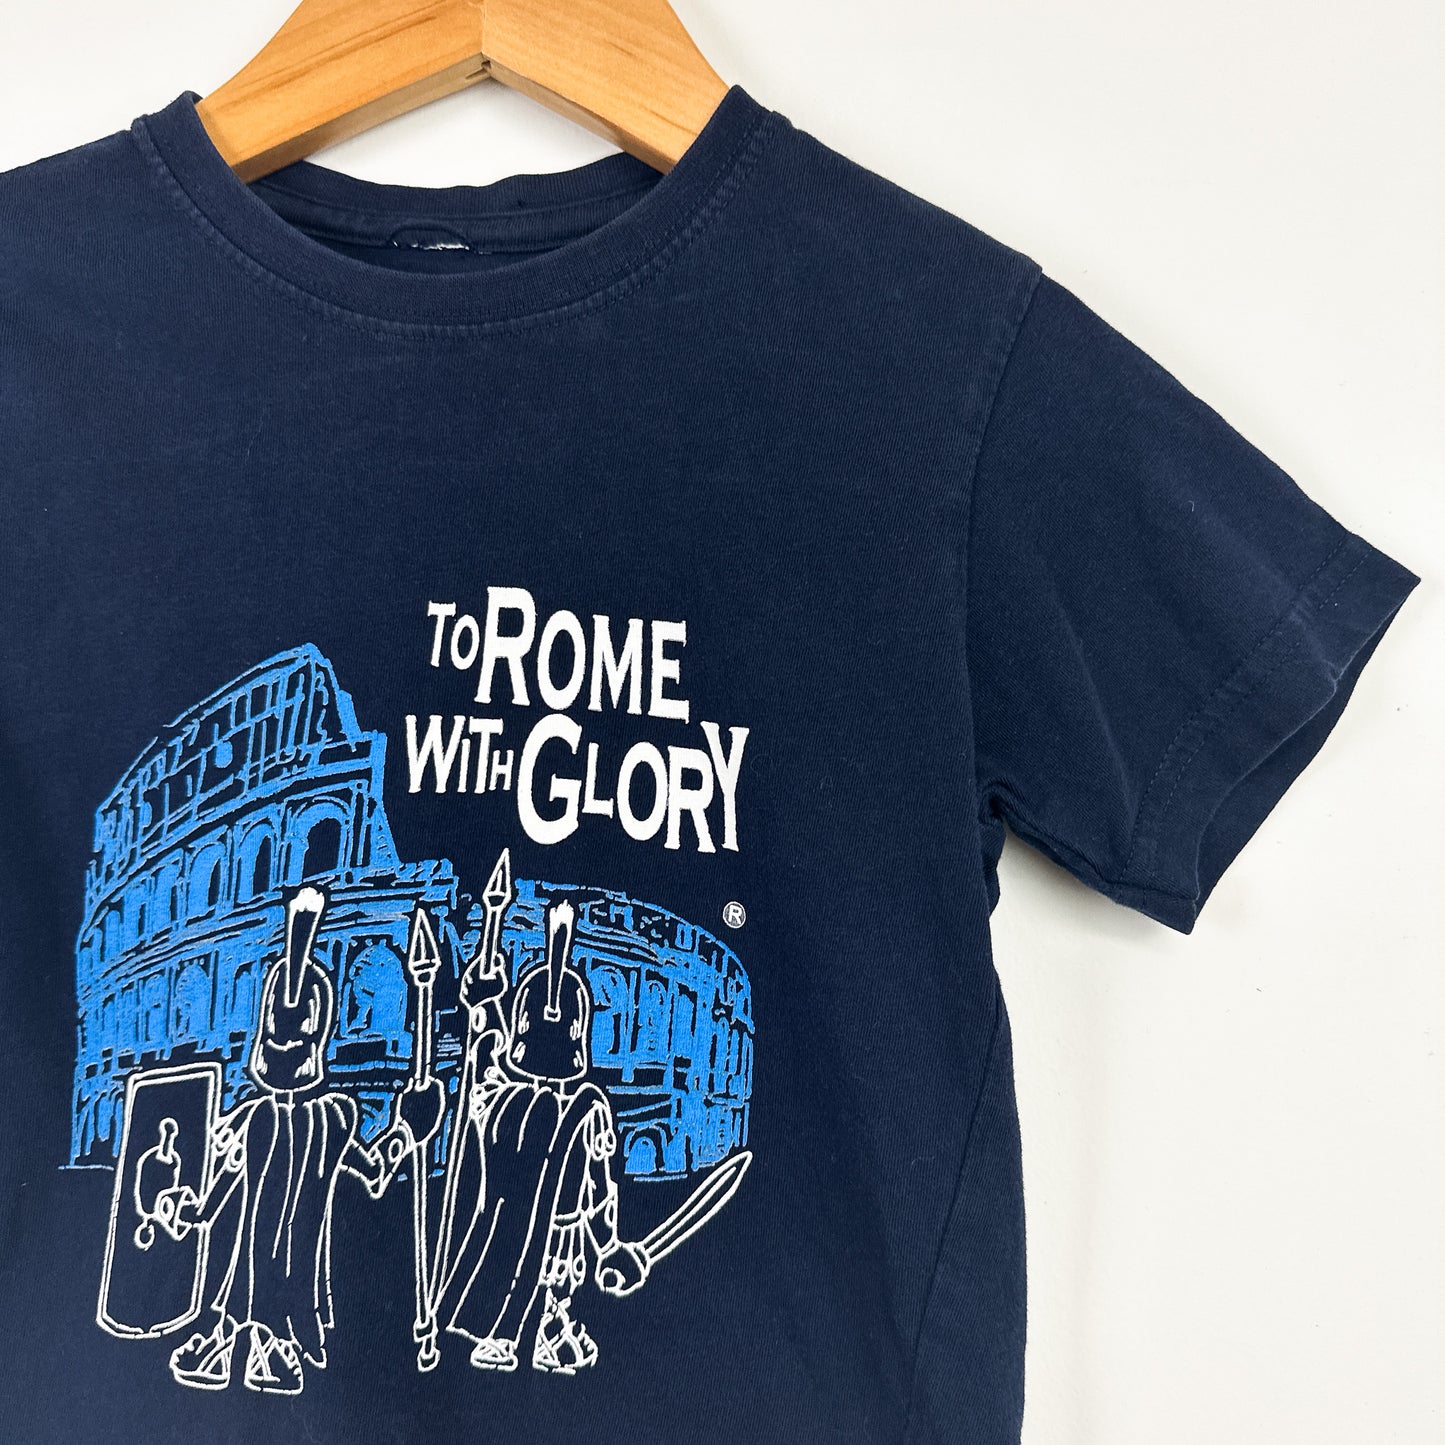 To Rome With Glory T-Shirt - Size 2T